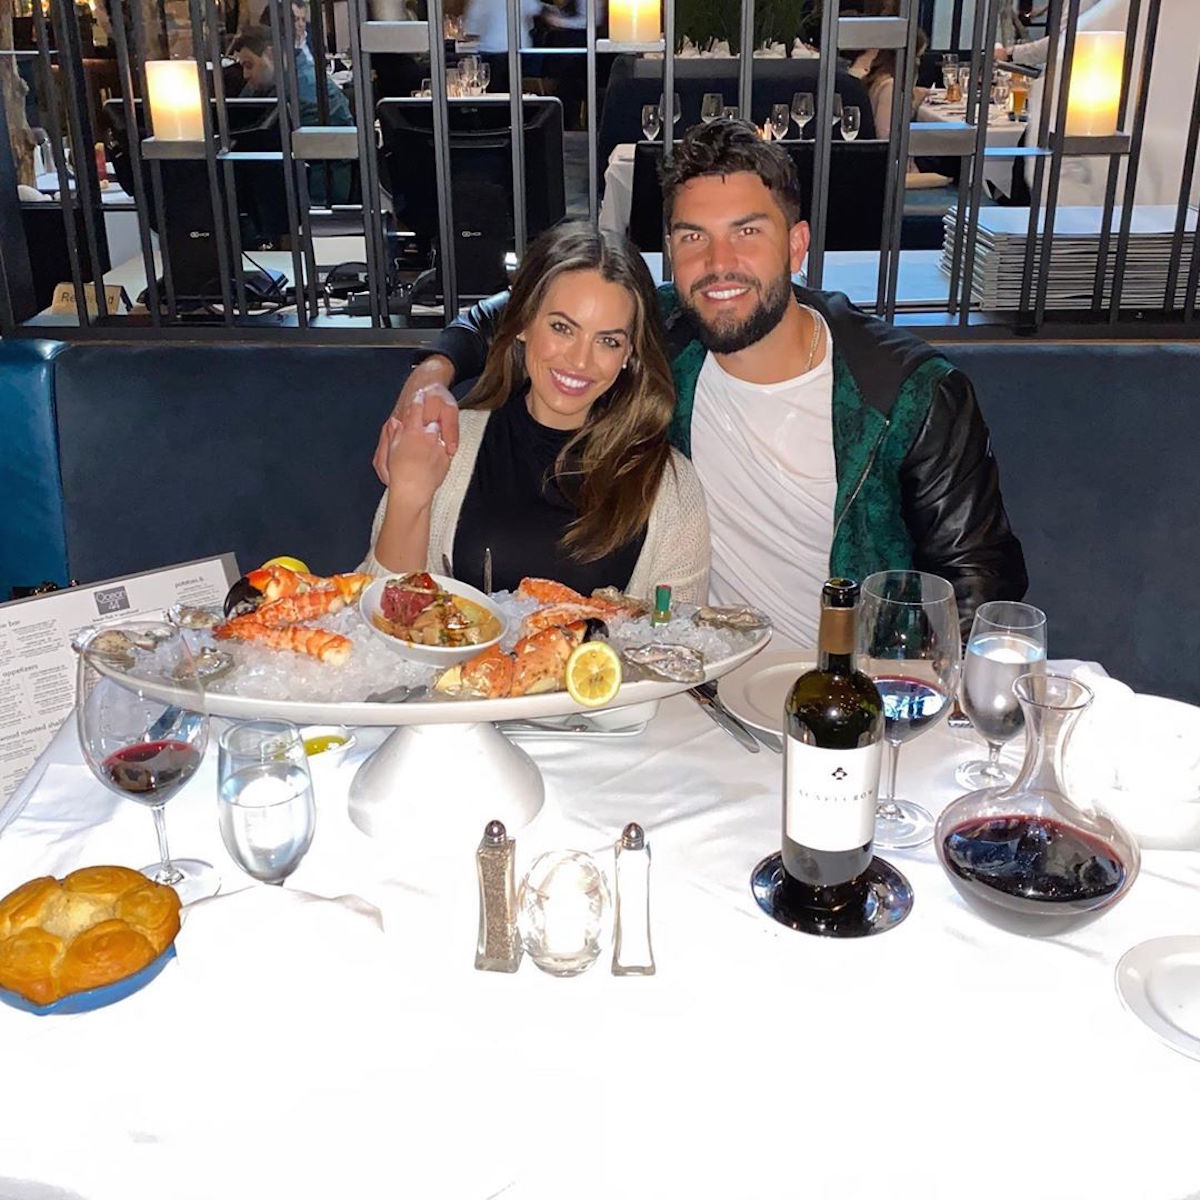 5 Facts on Eric Hosmer's Girlfriend, Kacie McDonnell - Off the Field News